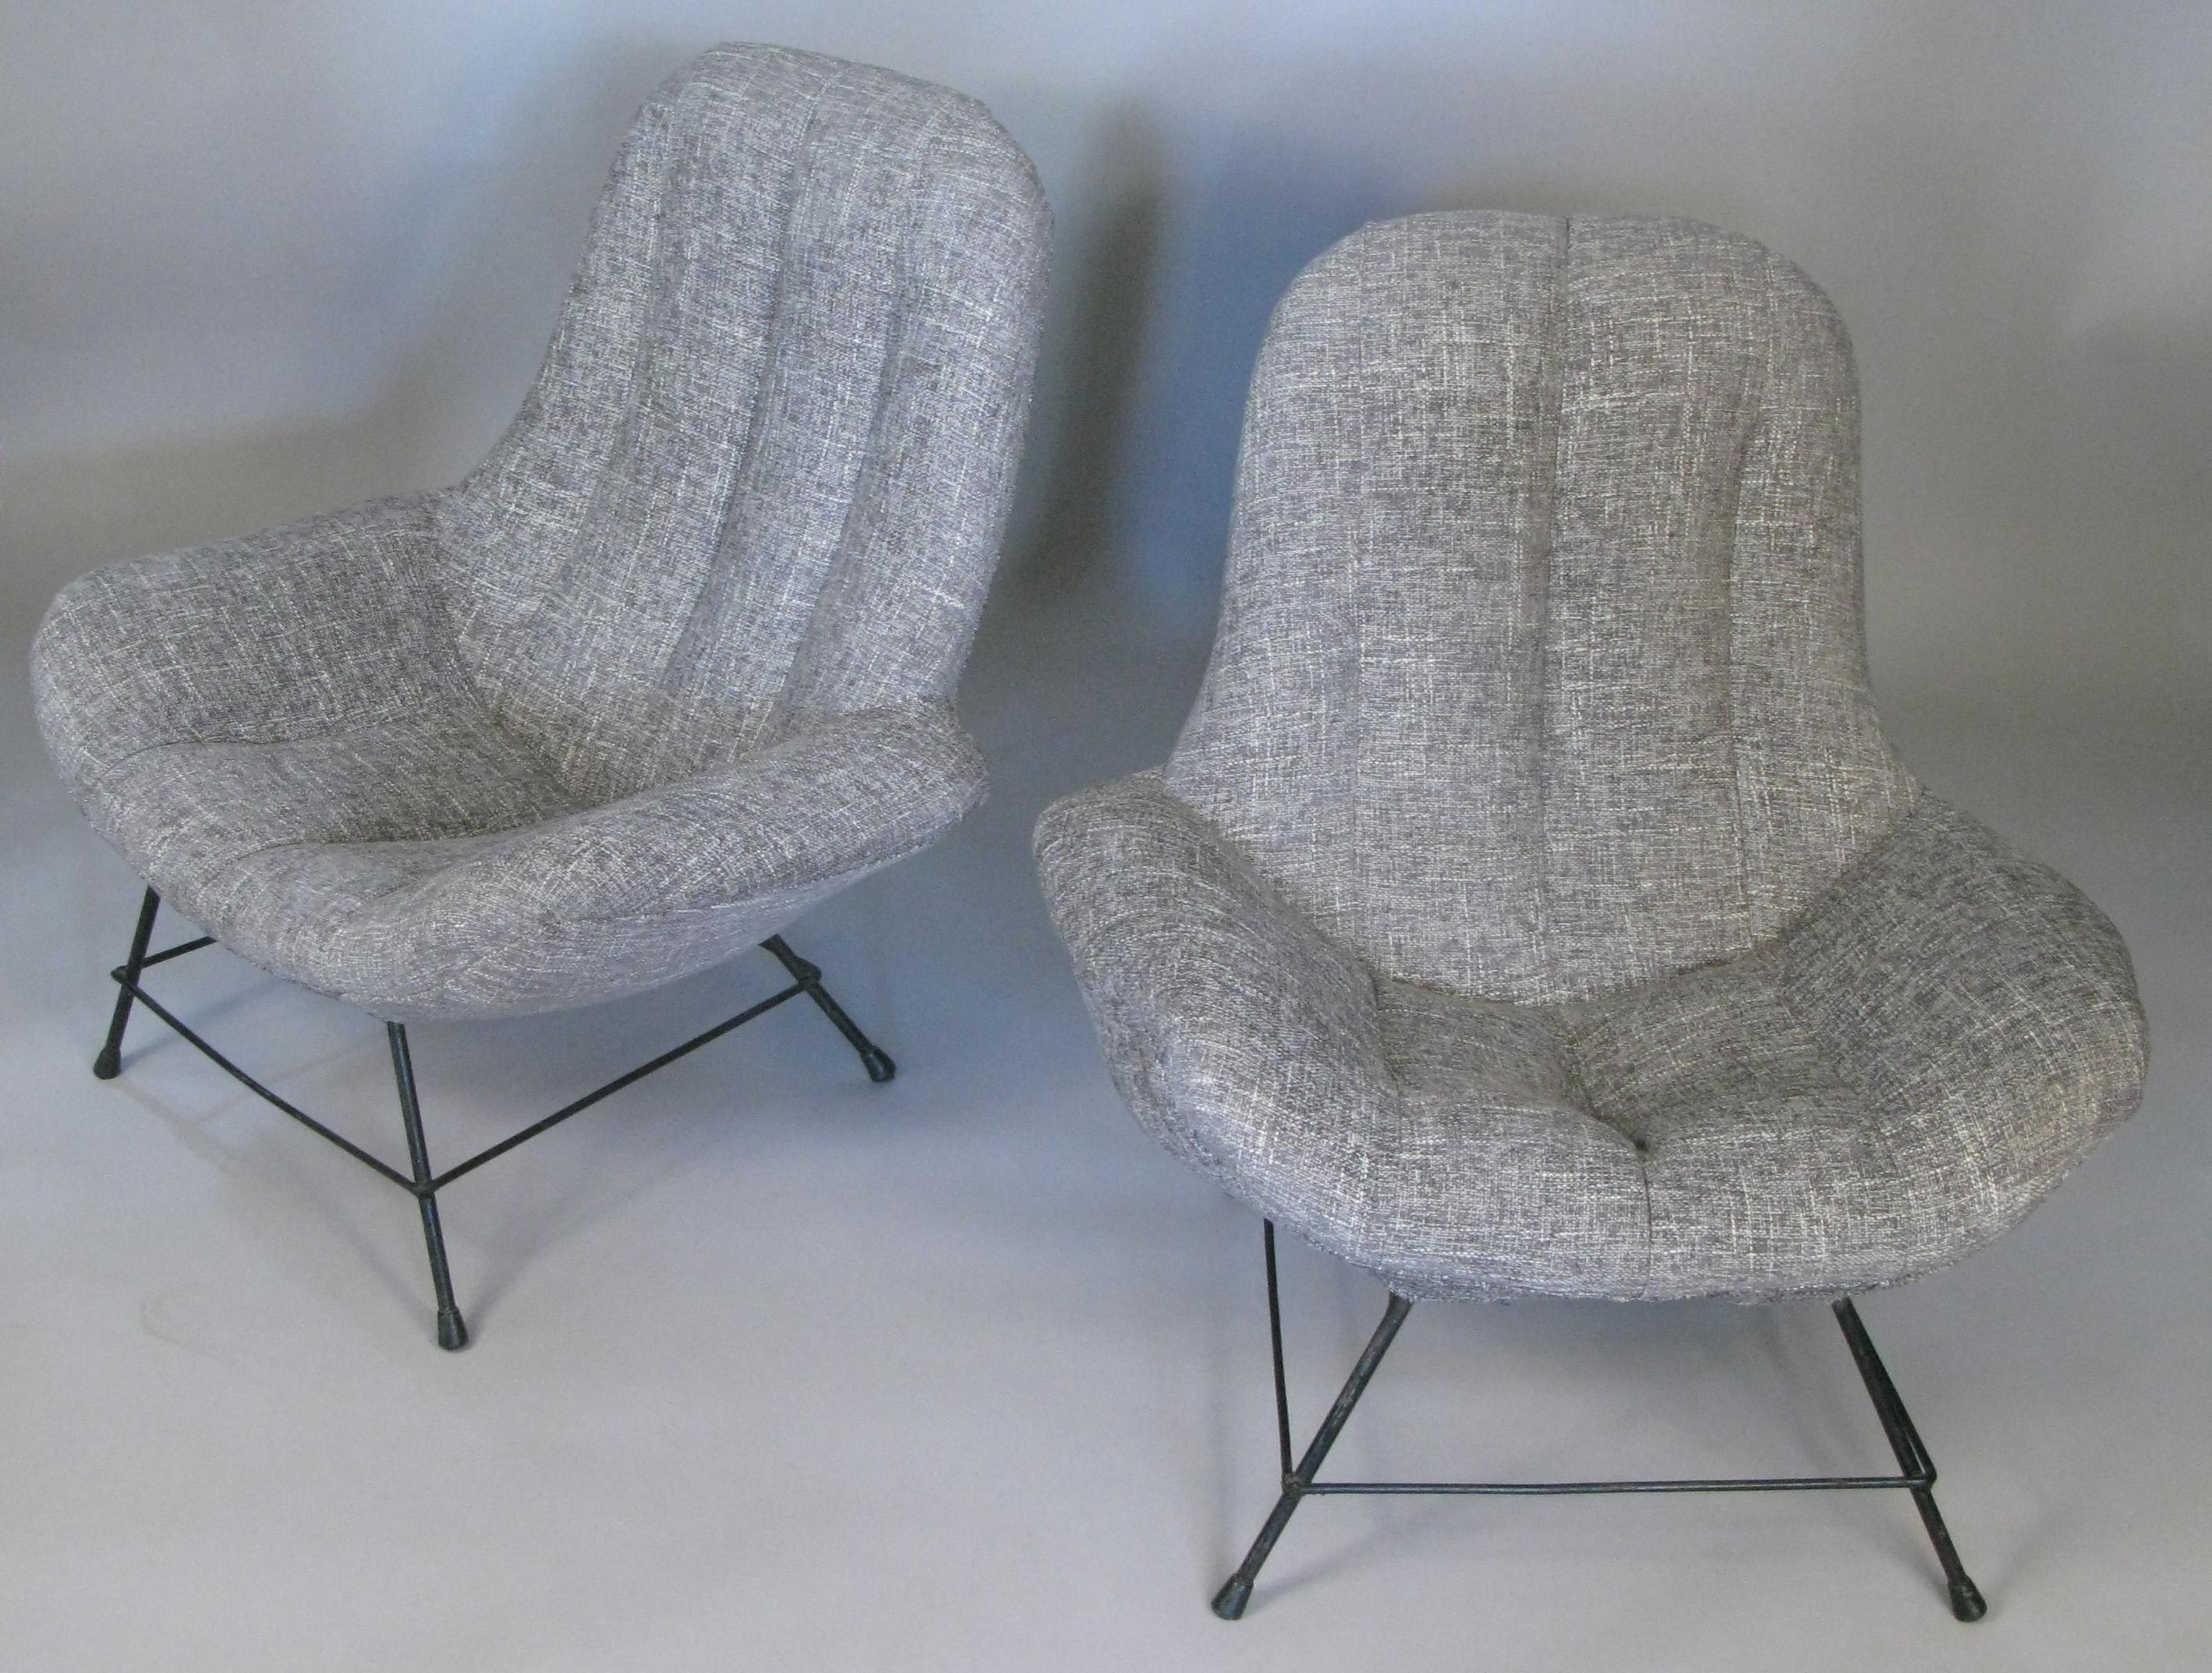 A pair of very comfortable vintage 1950s Italian lounge chairs, originally purchased at R Gallery in NYC. these are reminiscent of designs by Augusto Bozzi for Saporiti Italia. They have wrought iron frames, and have just been reupholstered in a